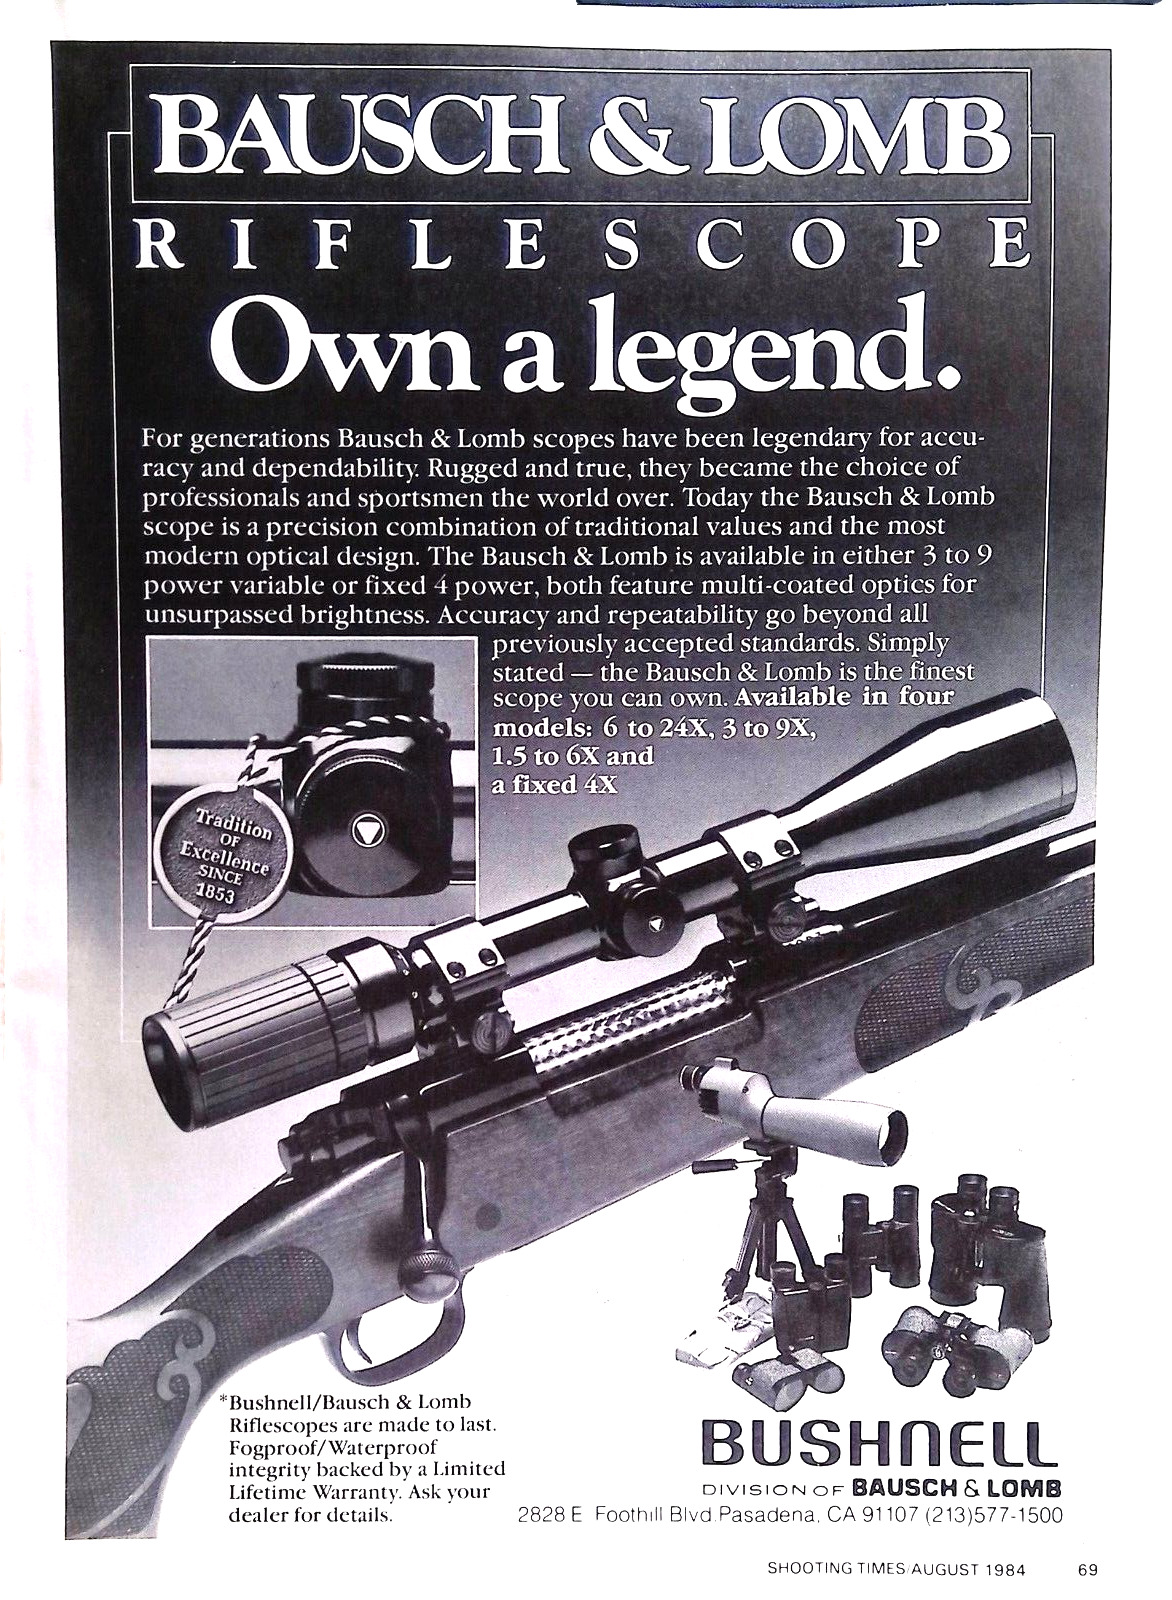 Print Ad Bushnell Bausch & Lomb Riflescope Own a Legend Made to Last 1984